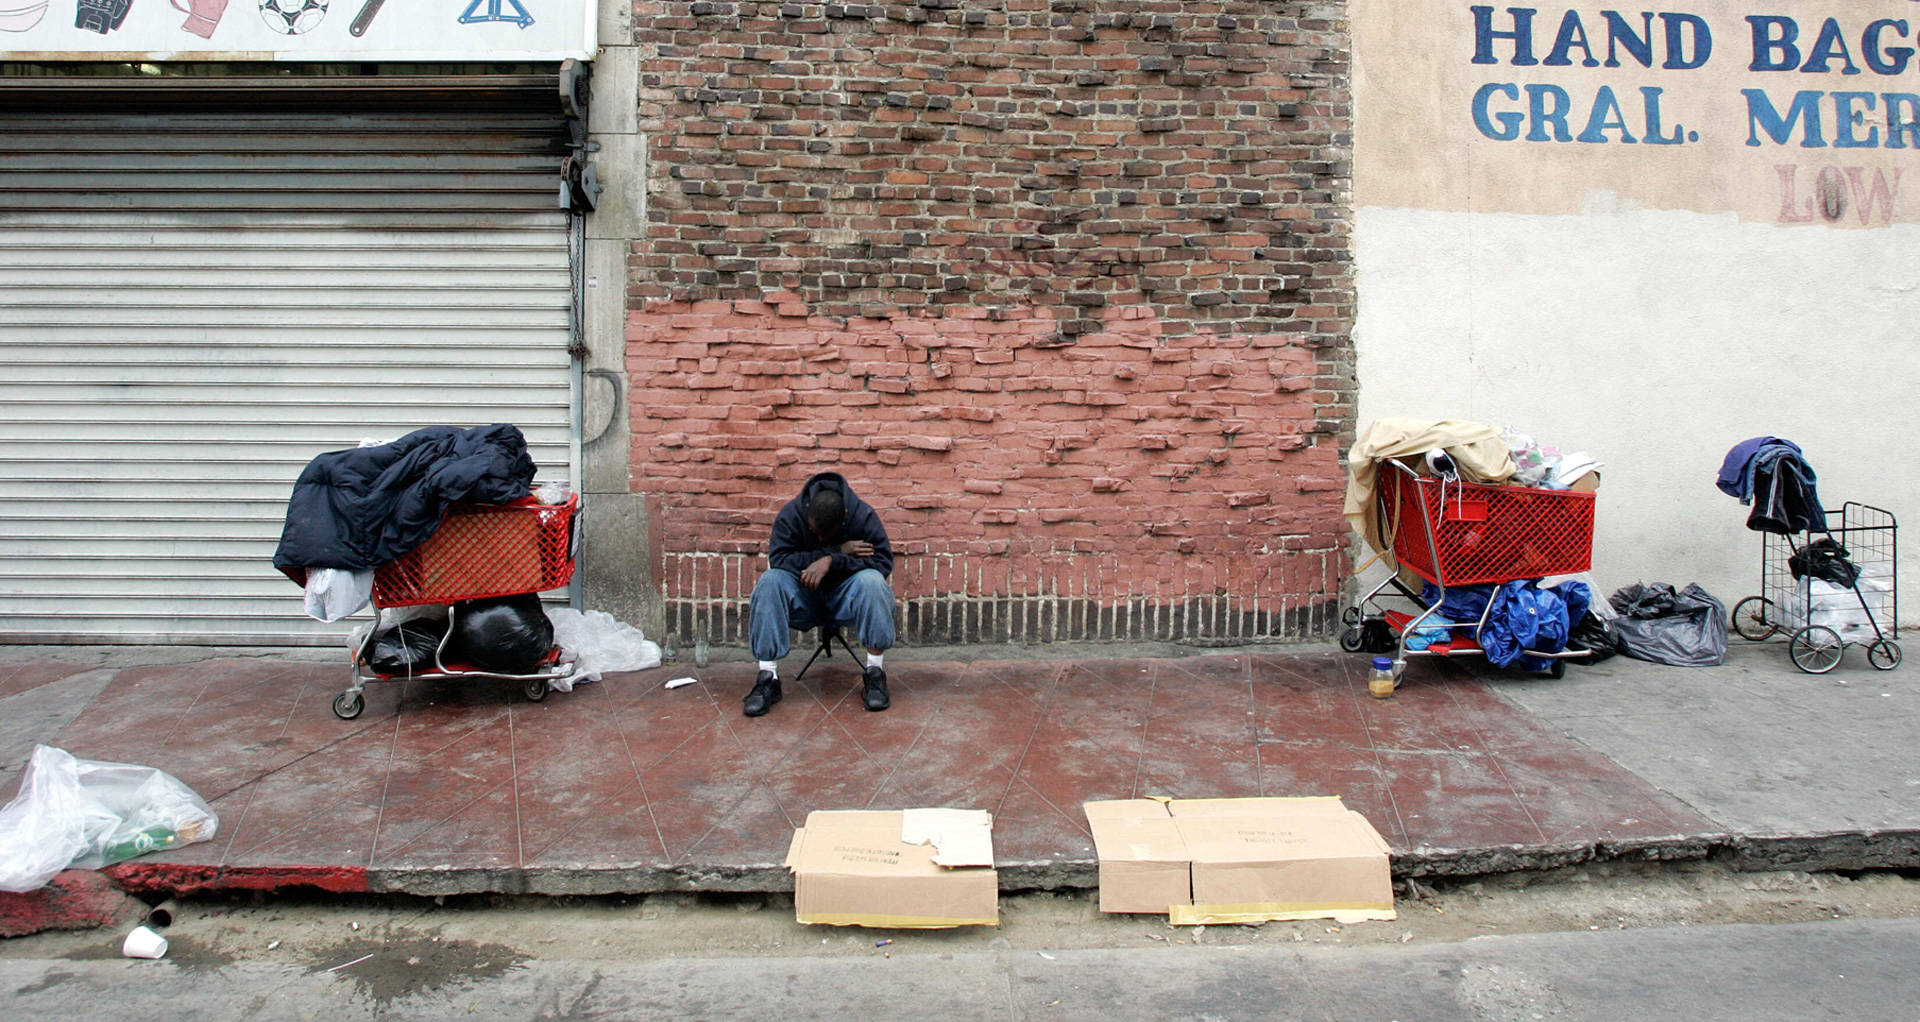 A homeless man waits to get in line for food distribution in Los Angeles. HECTOR MATA/AFP/Getty Images